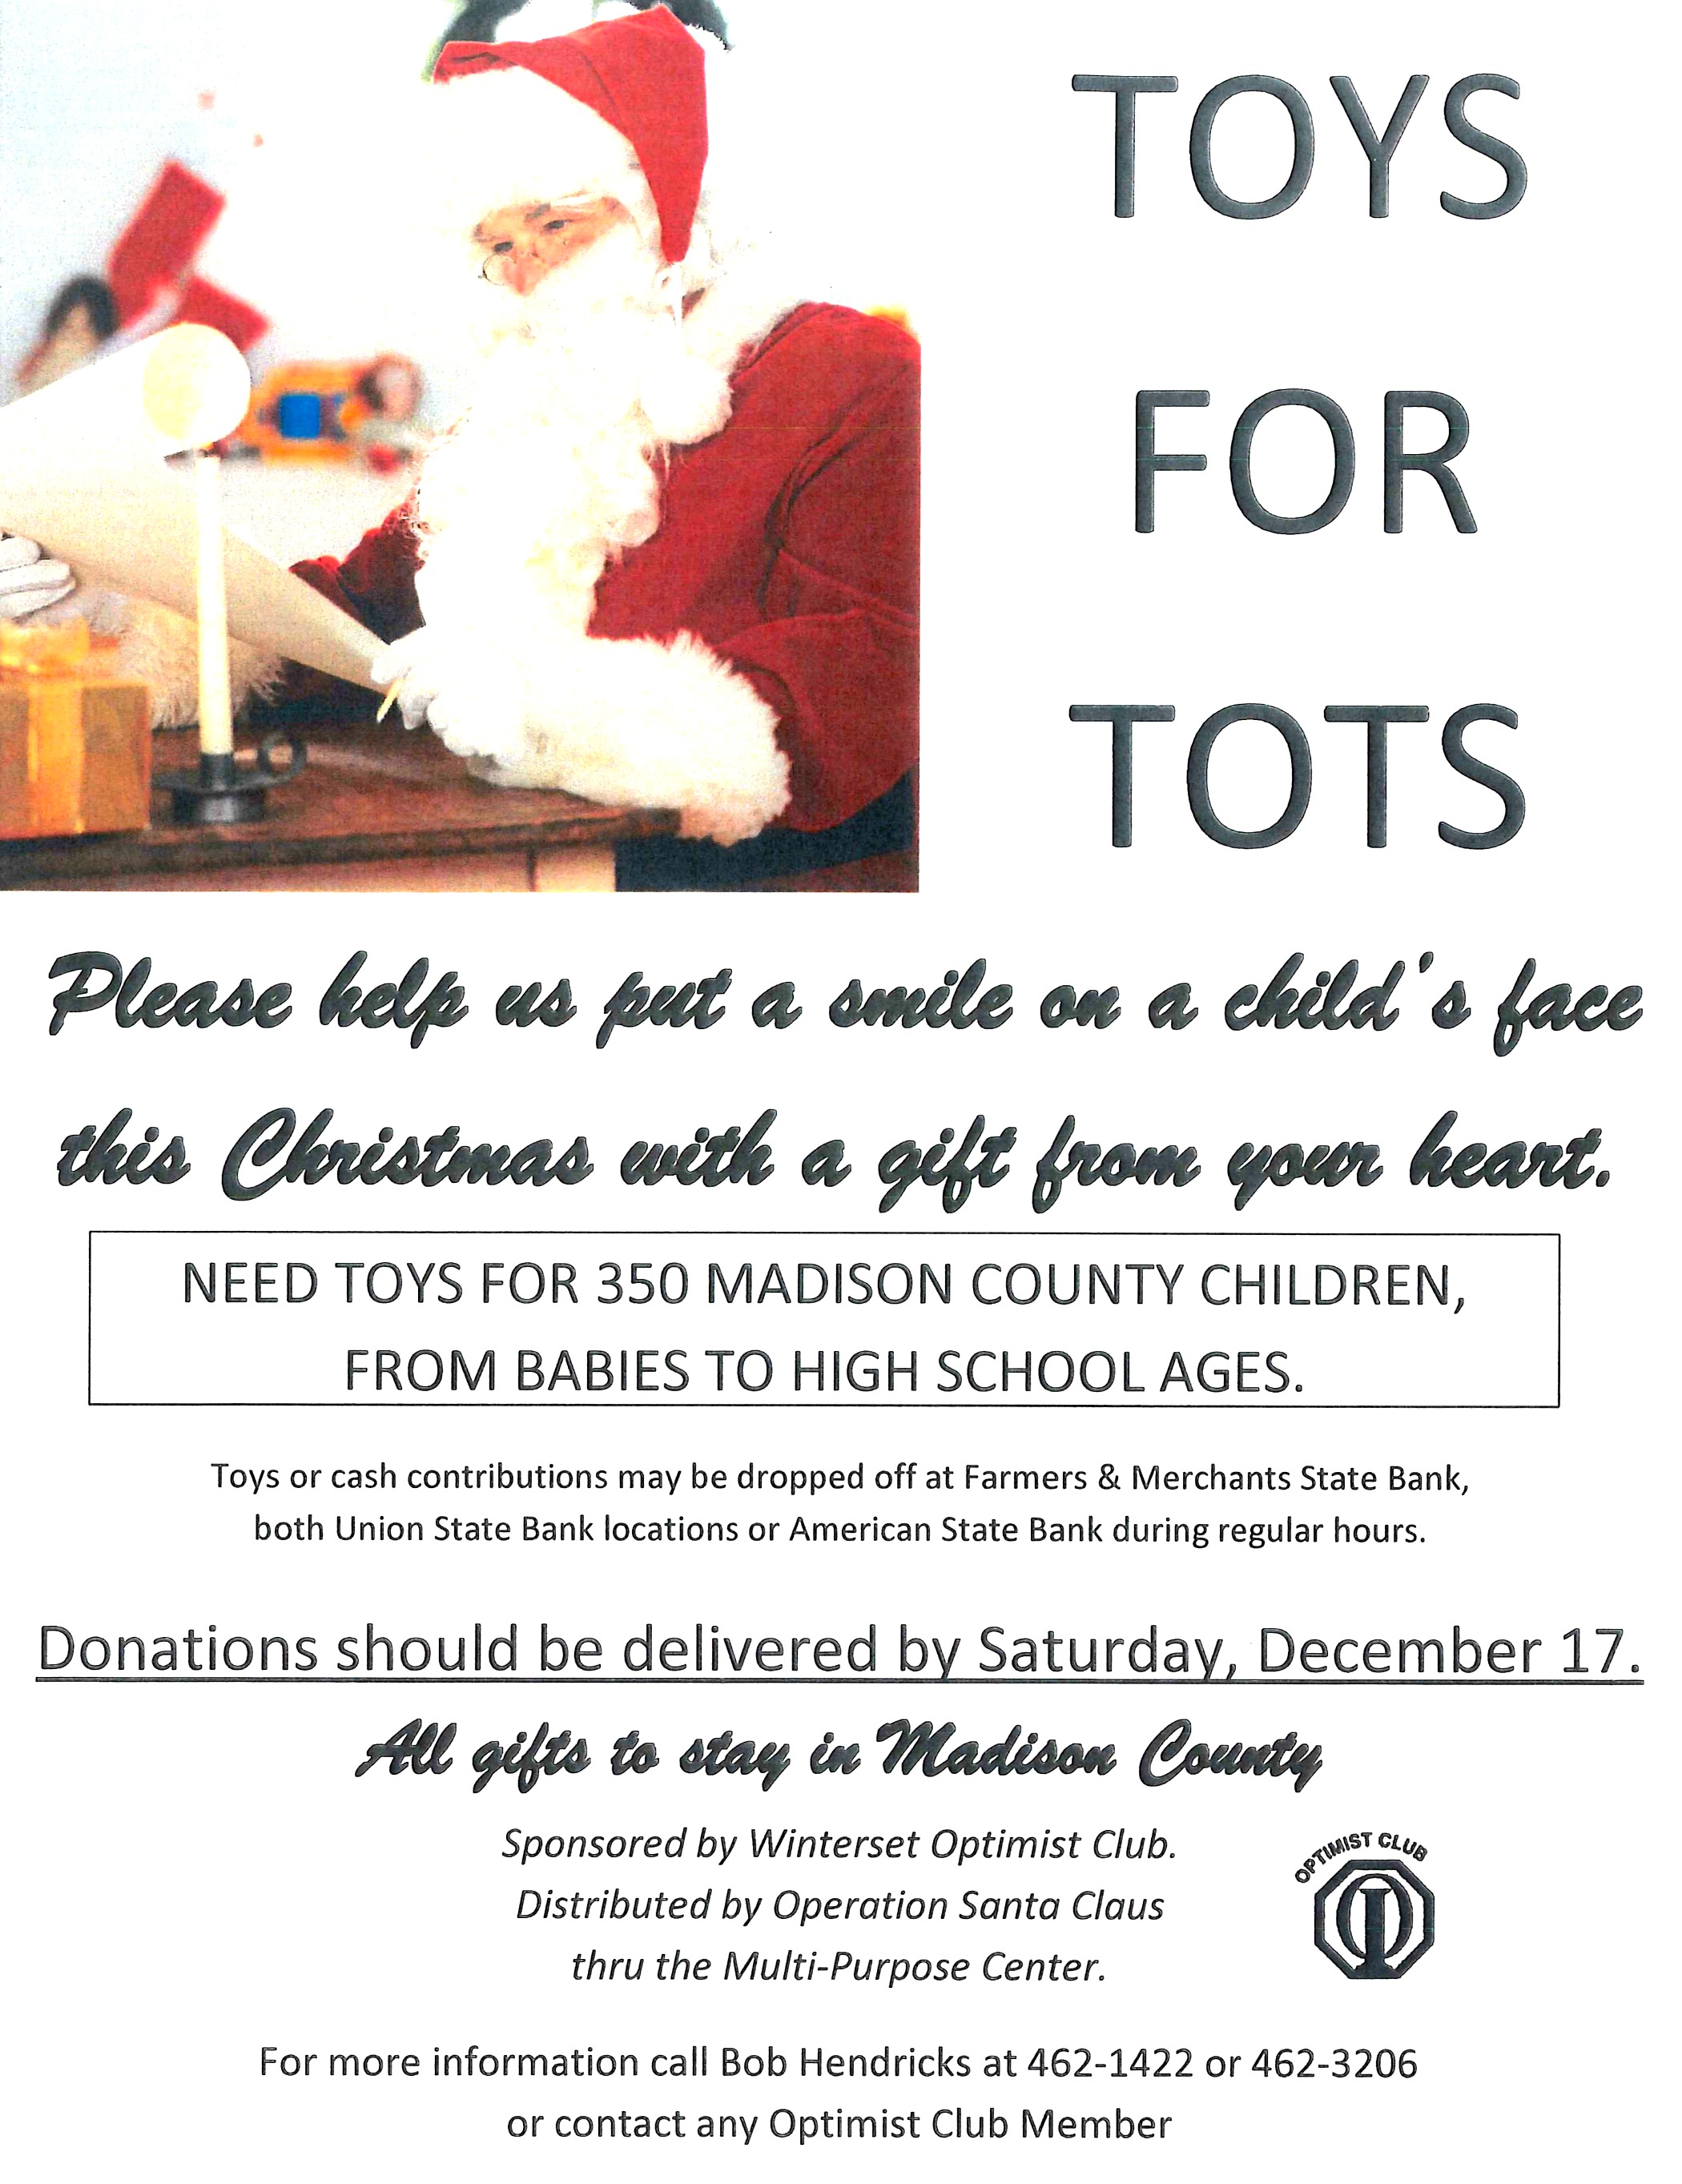 toys for tots-2